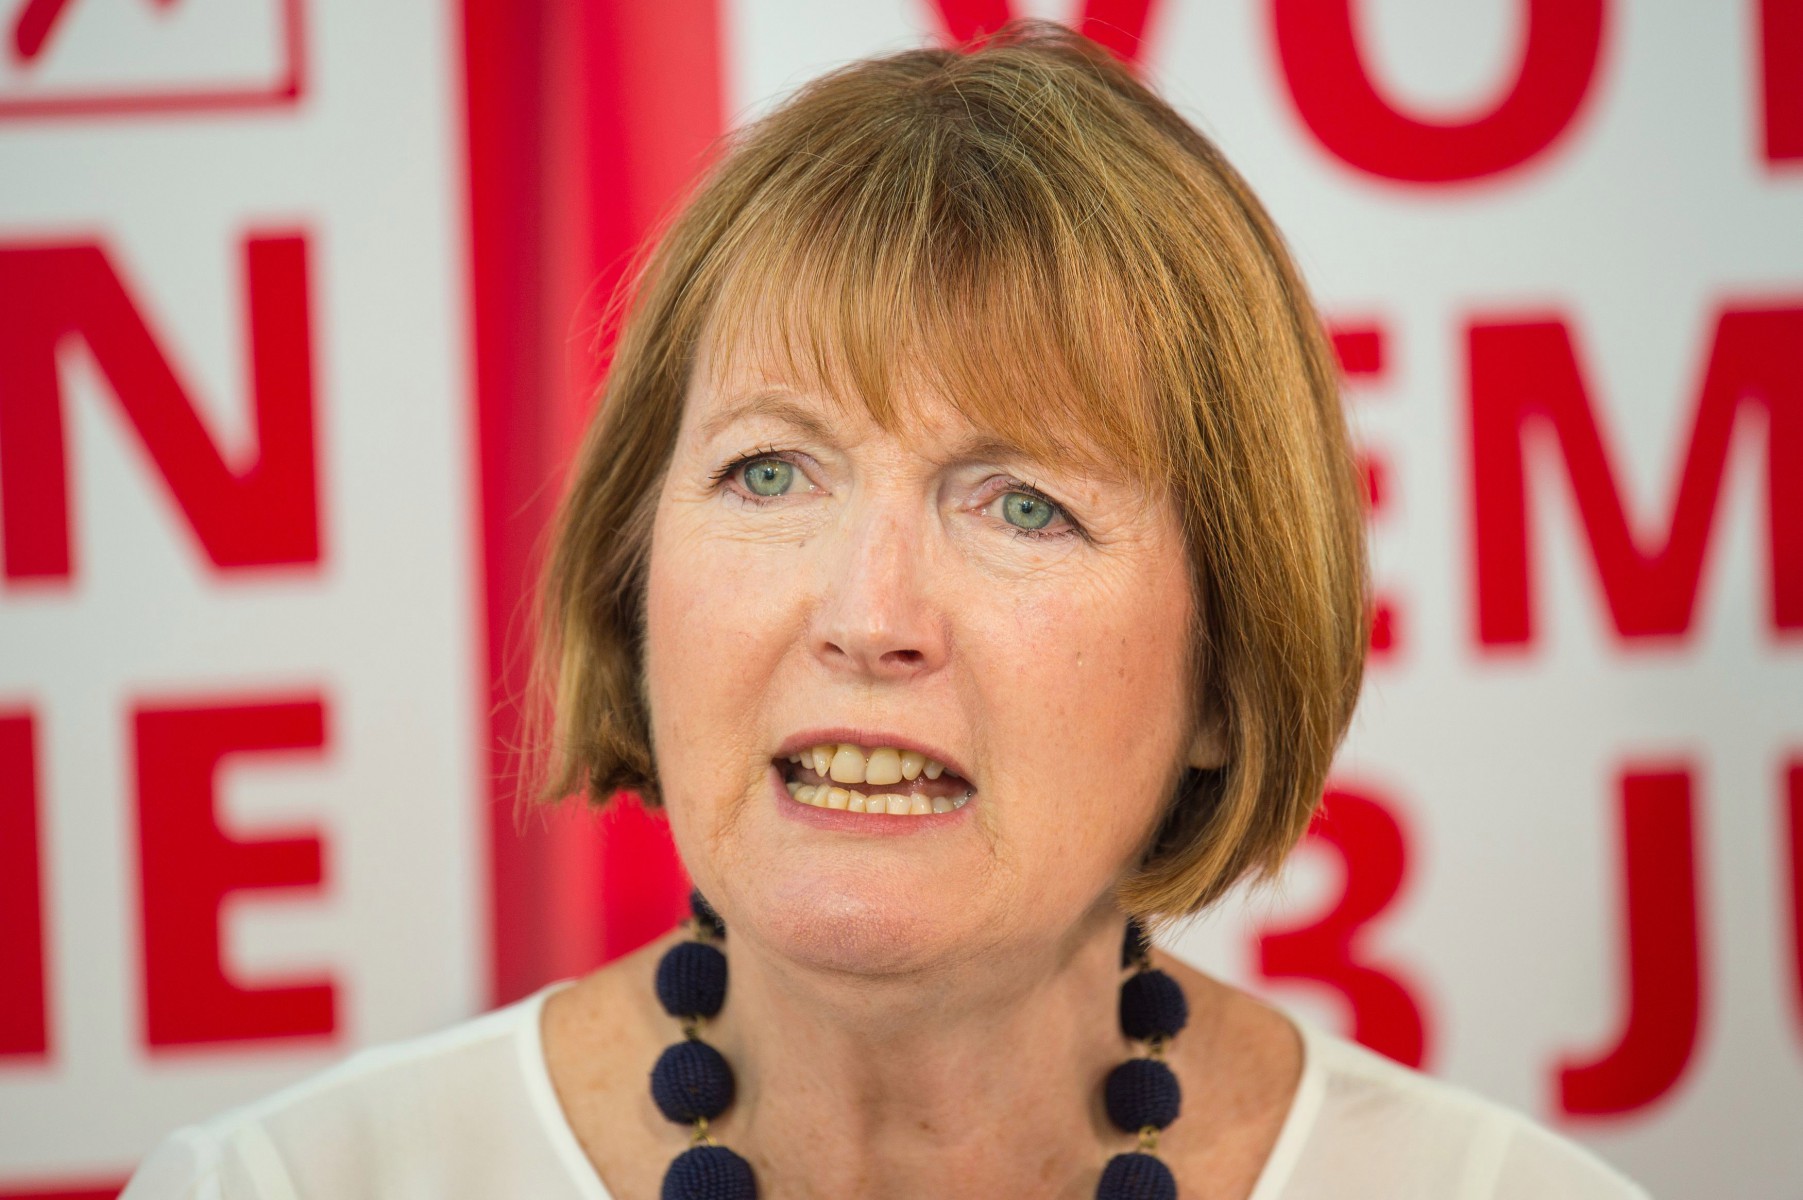 Even preachy Labour veteran Harriet Harman would be better than the current Speaker